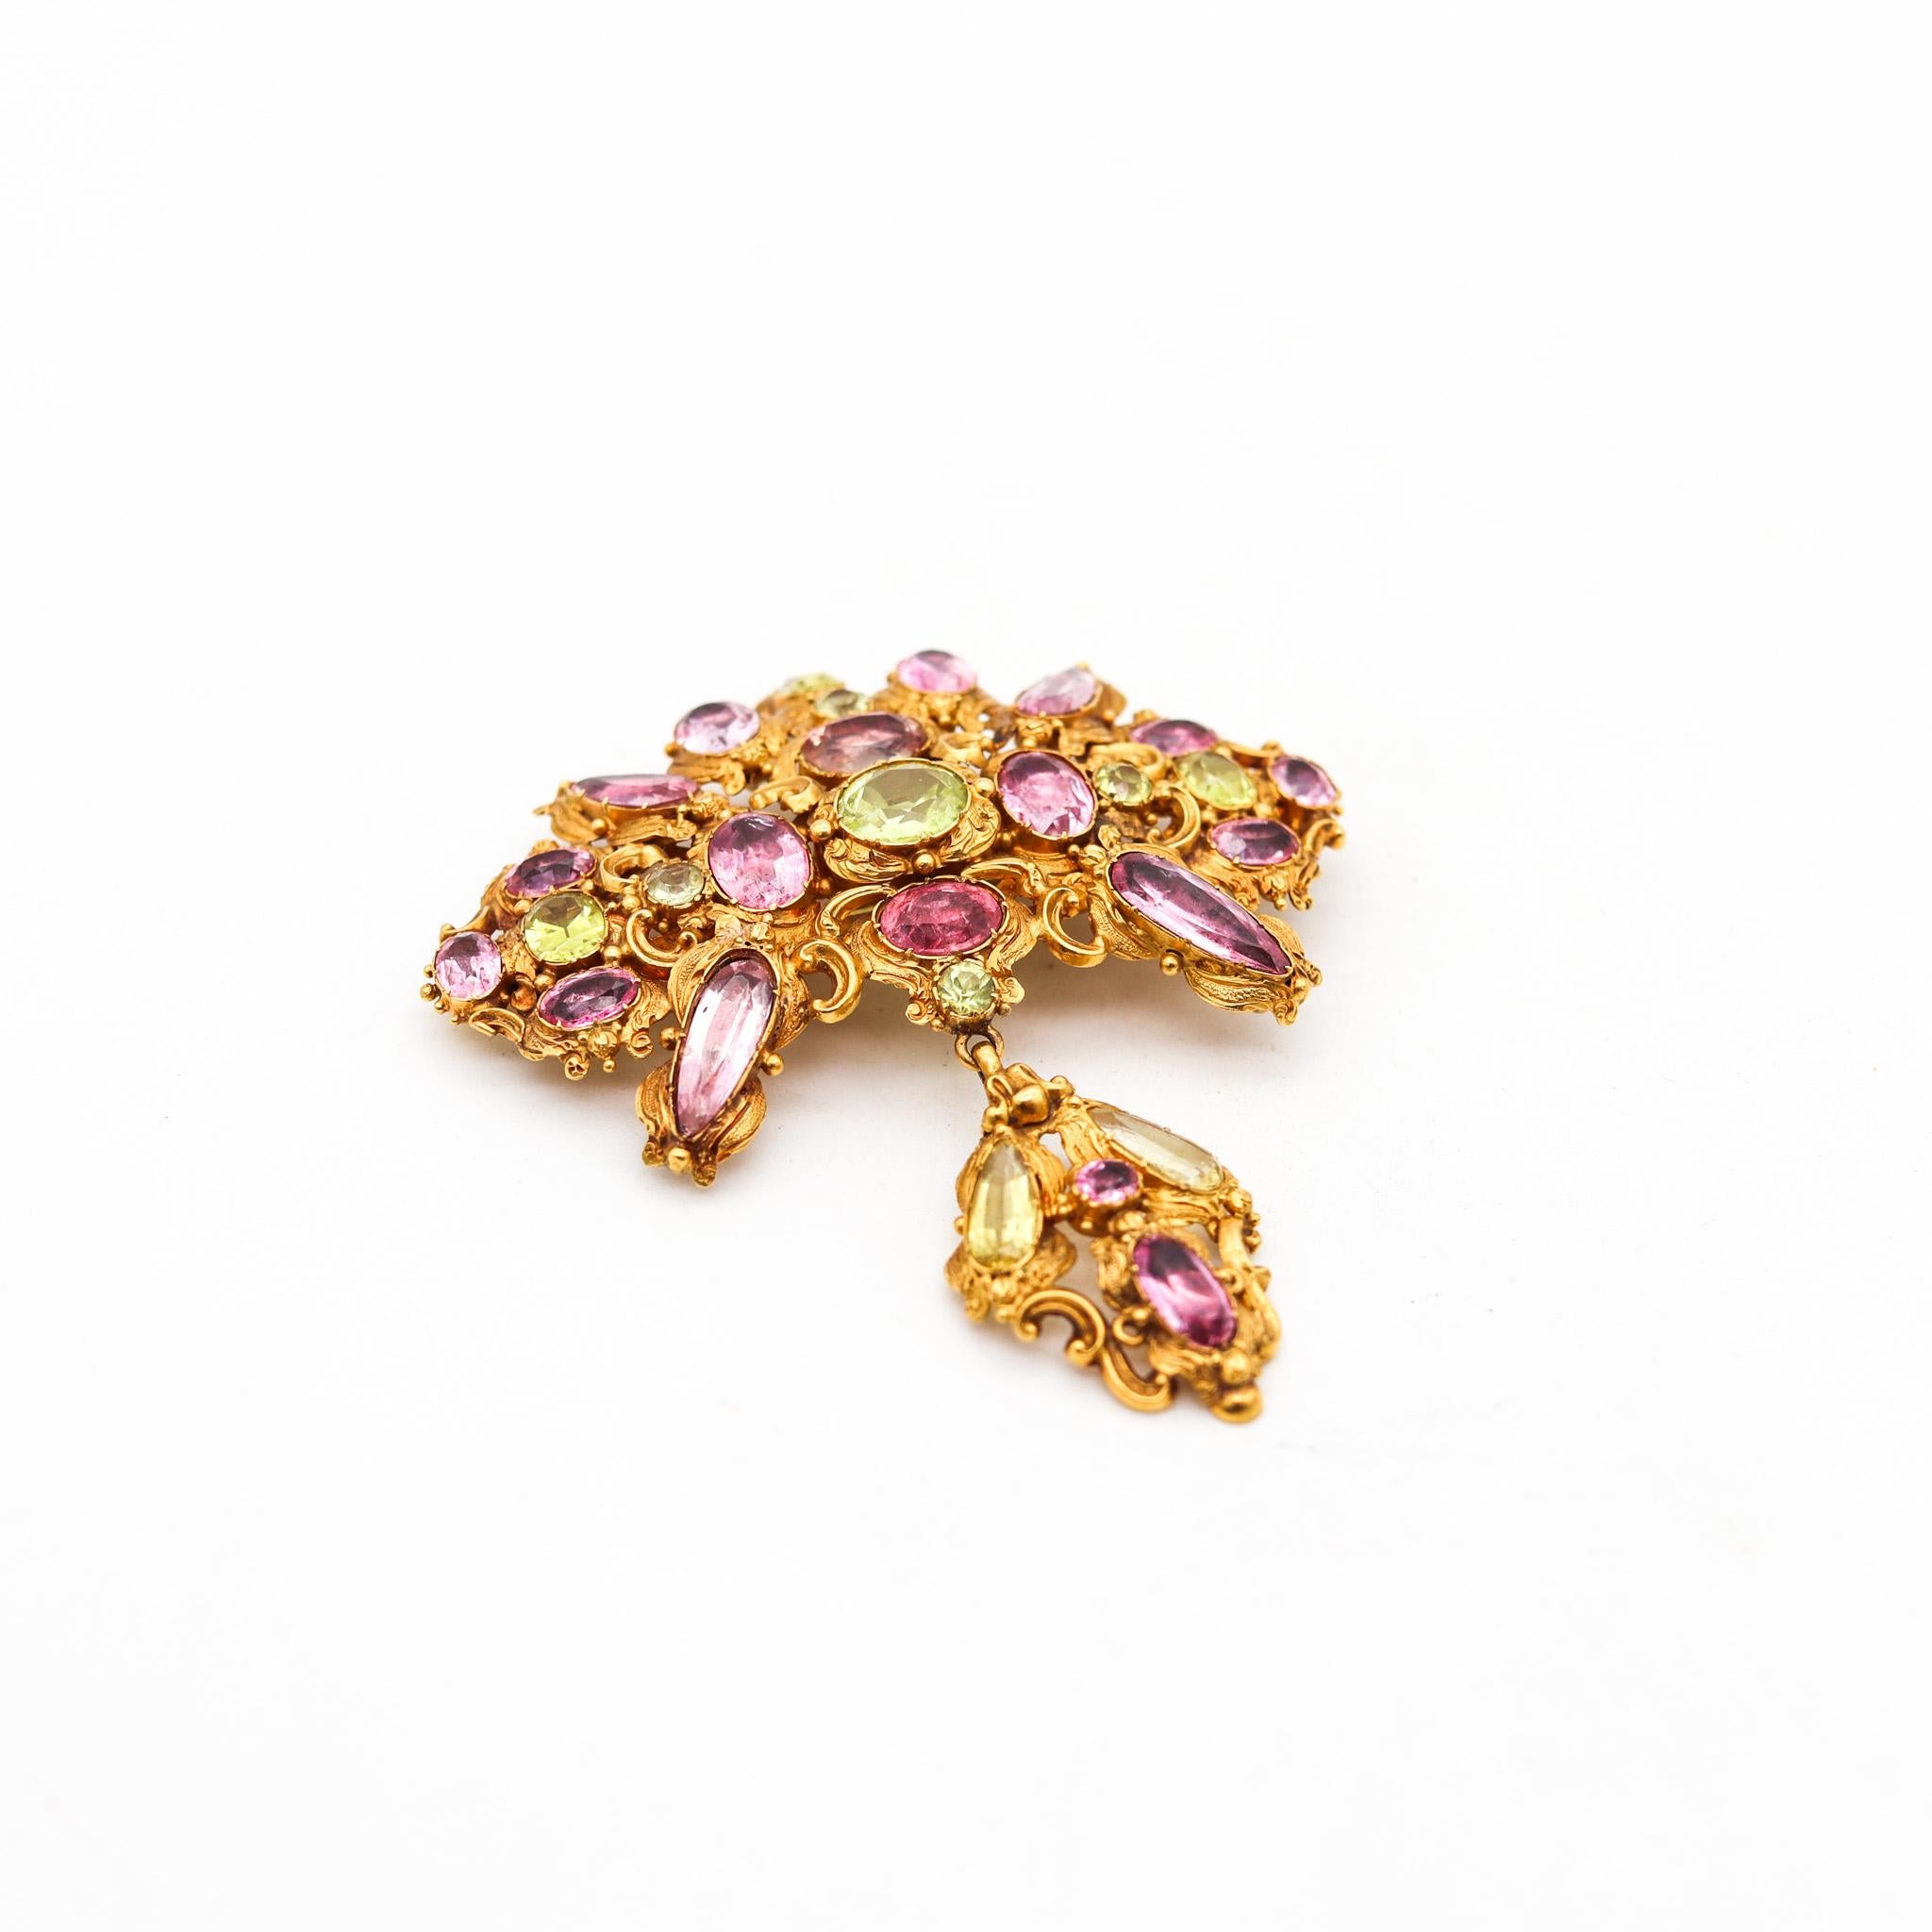 Mixed Cut Georgian 1760 Iberian Corsage Girandole Brooch In 18-20Kt Gold With Gemstones For Sale